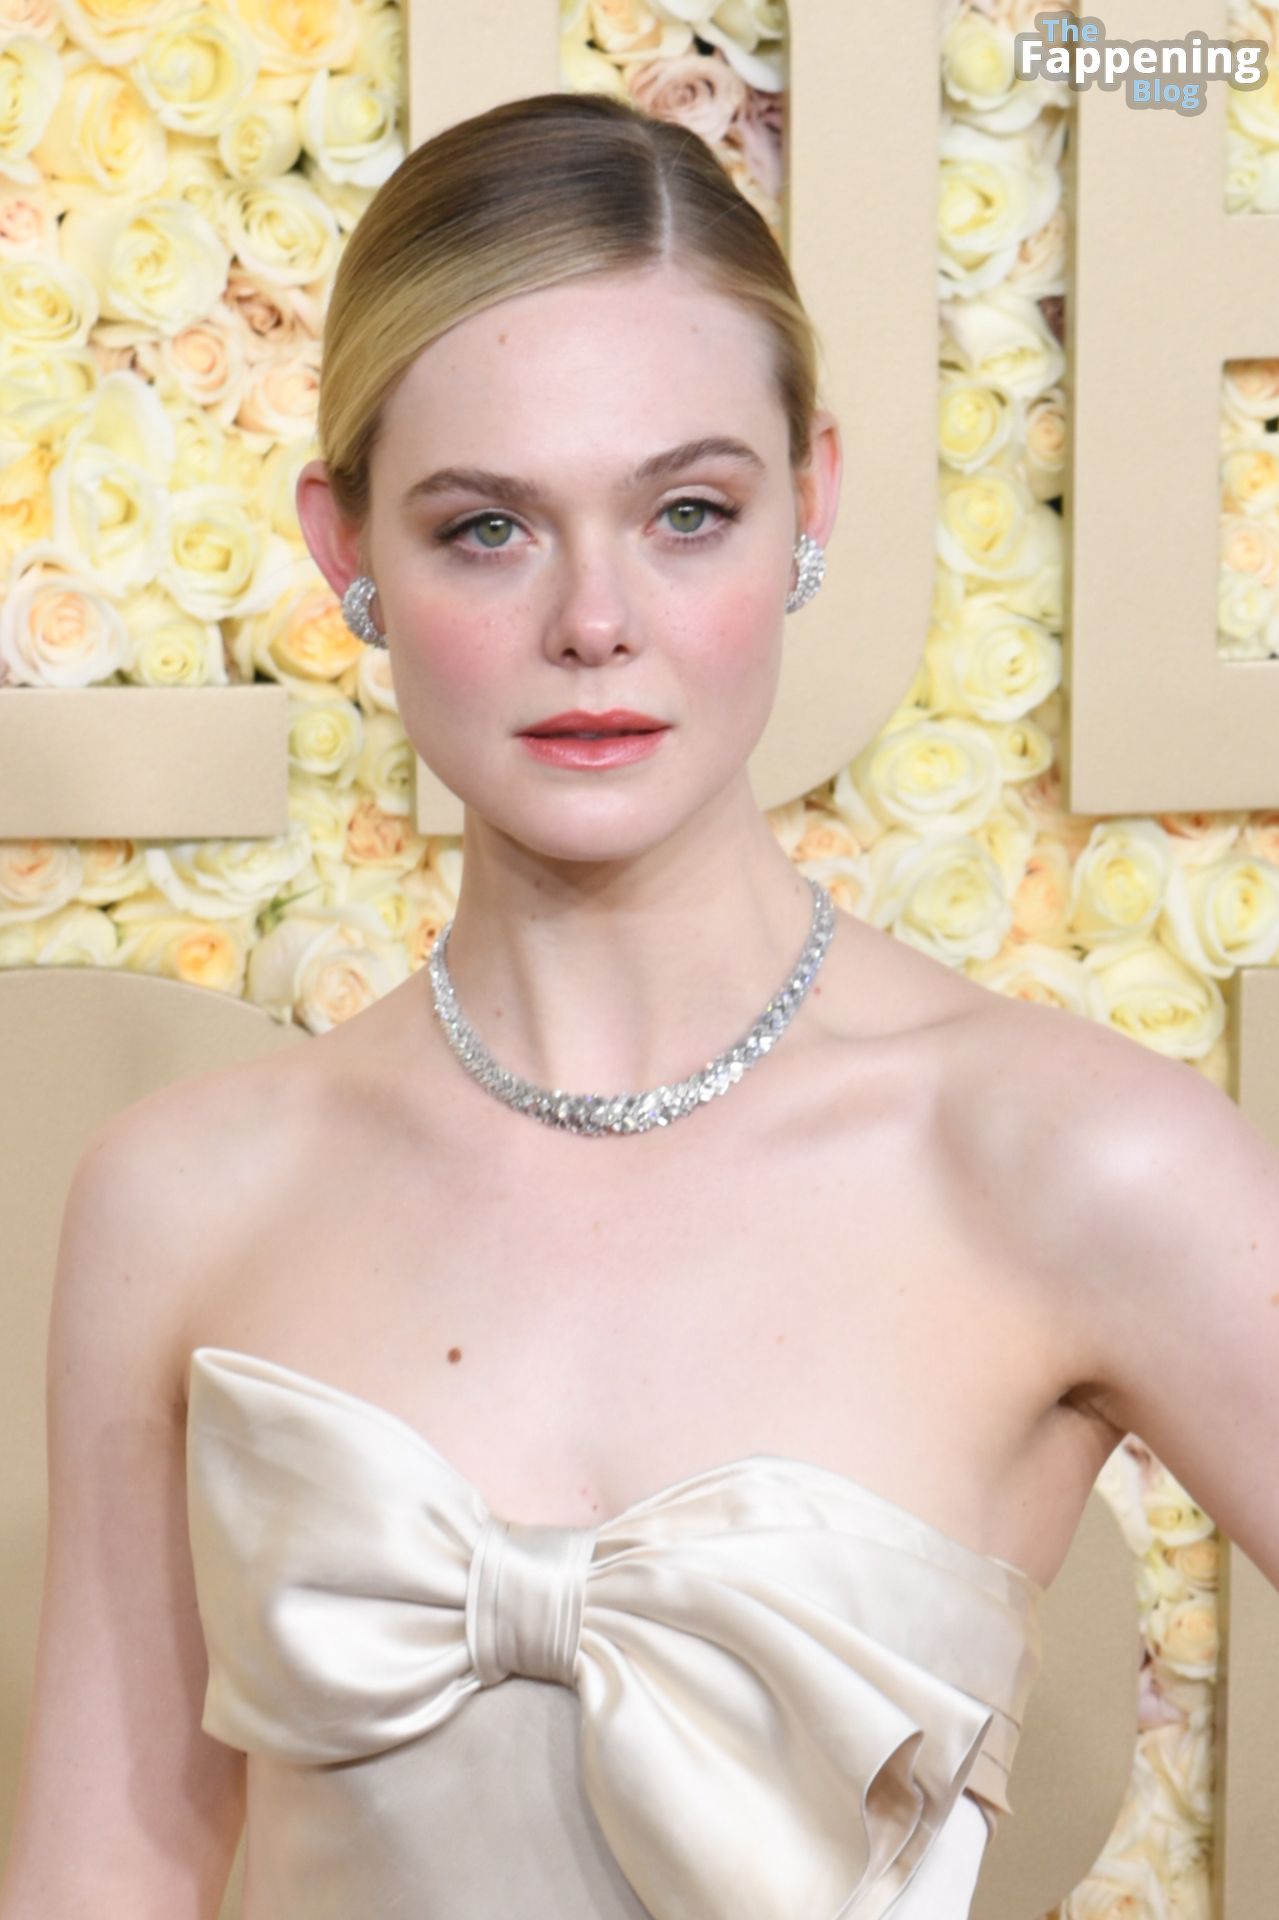 Elle-Fanning-Sexy-16-The-Fappening-Blog.jpg